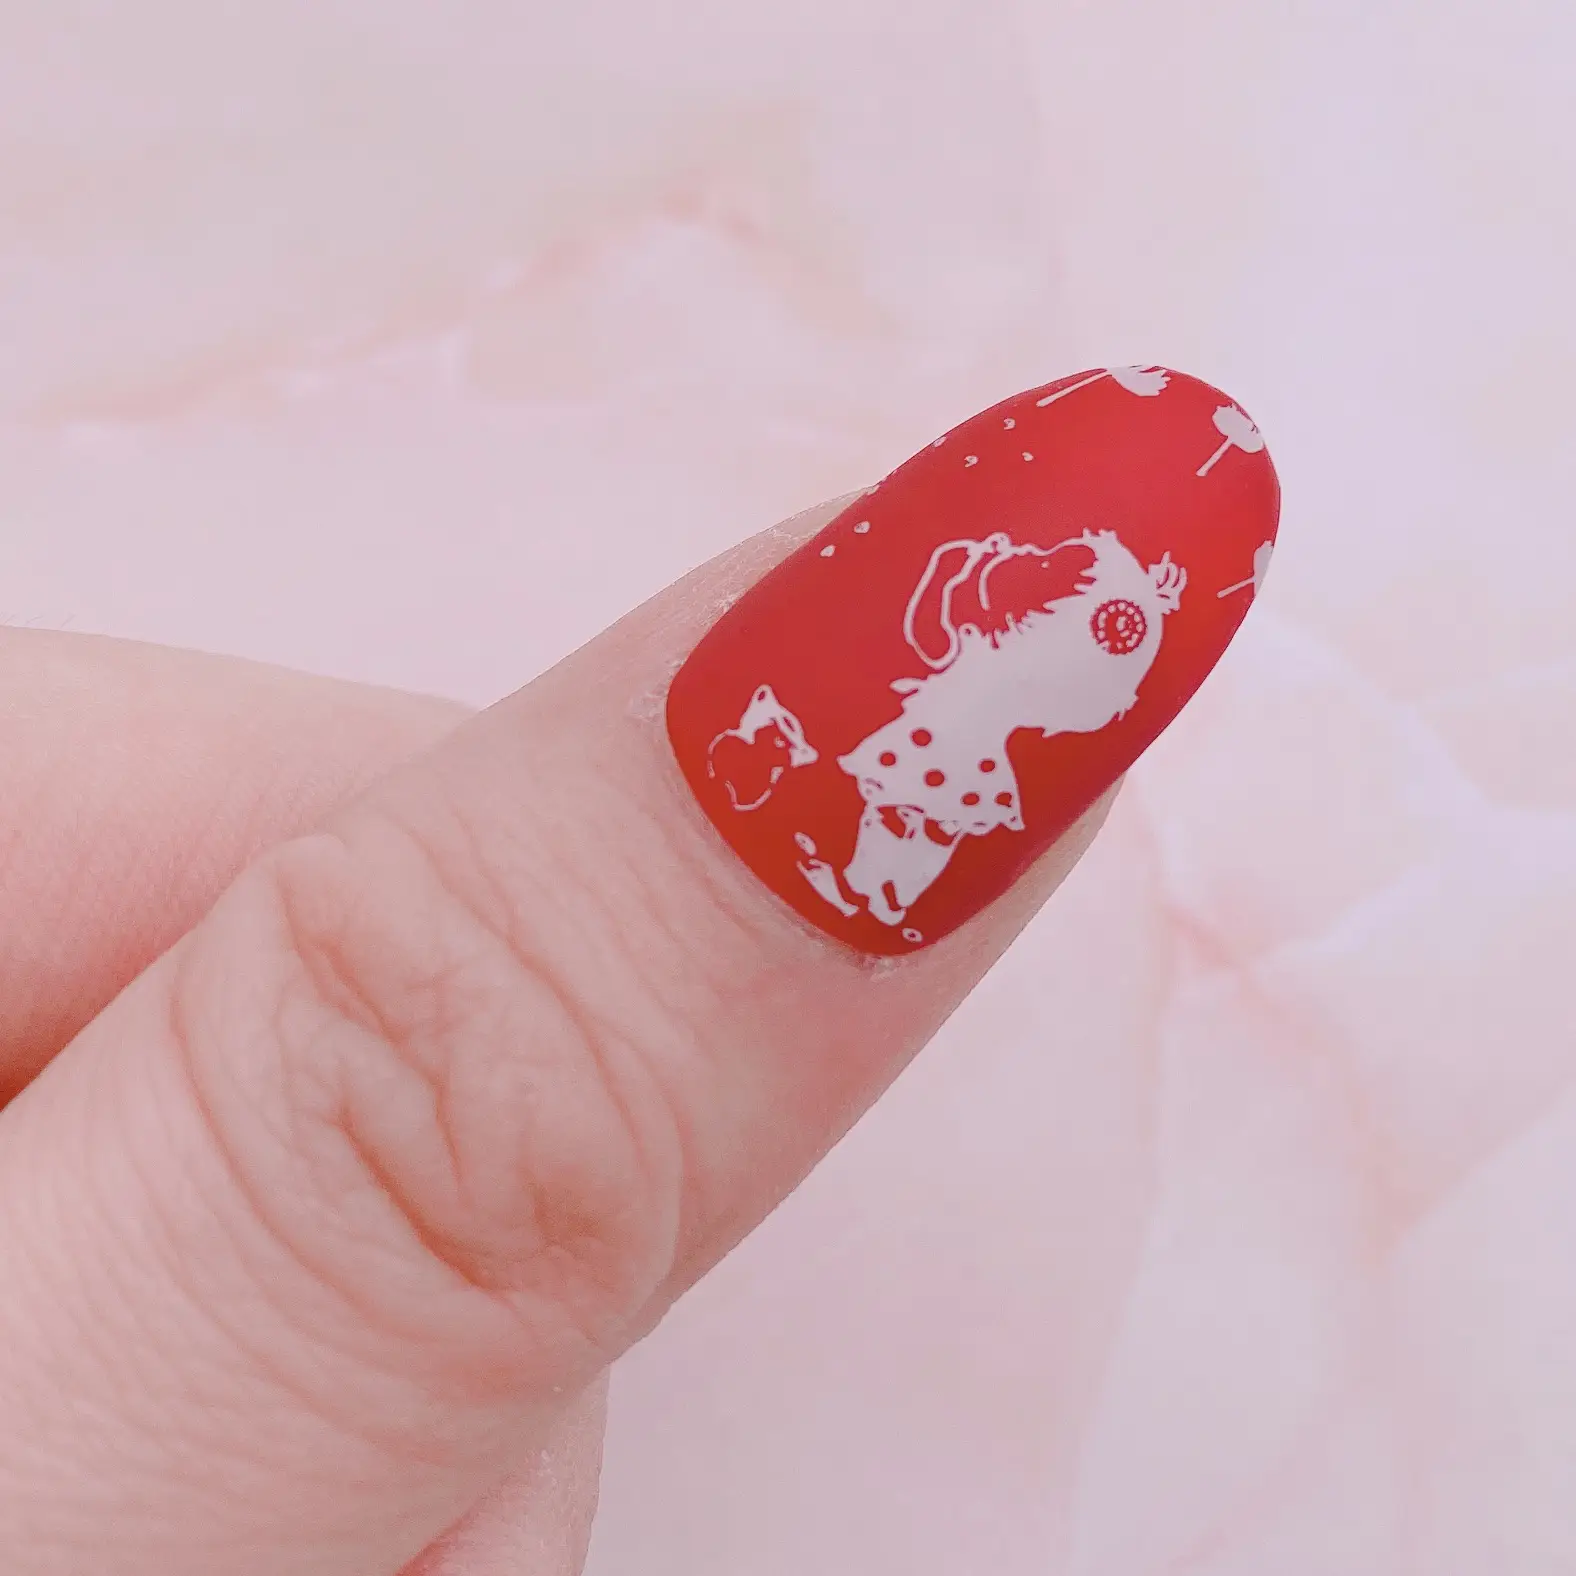 HOW I USE PIGMENT POWDER FOR NAIL ART